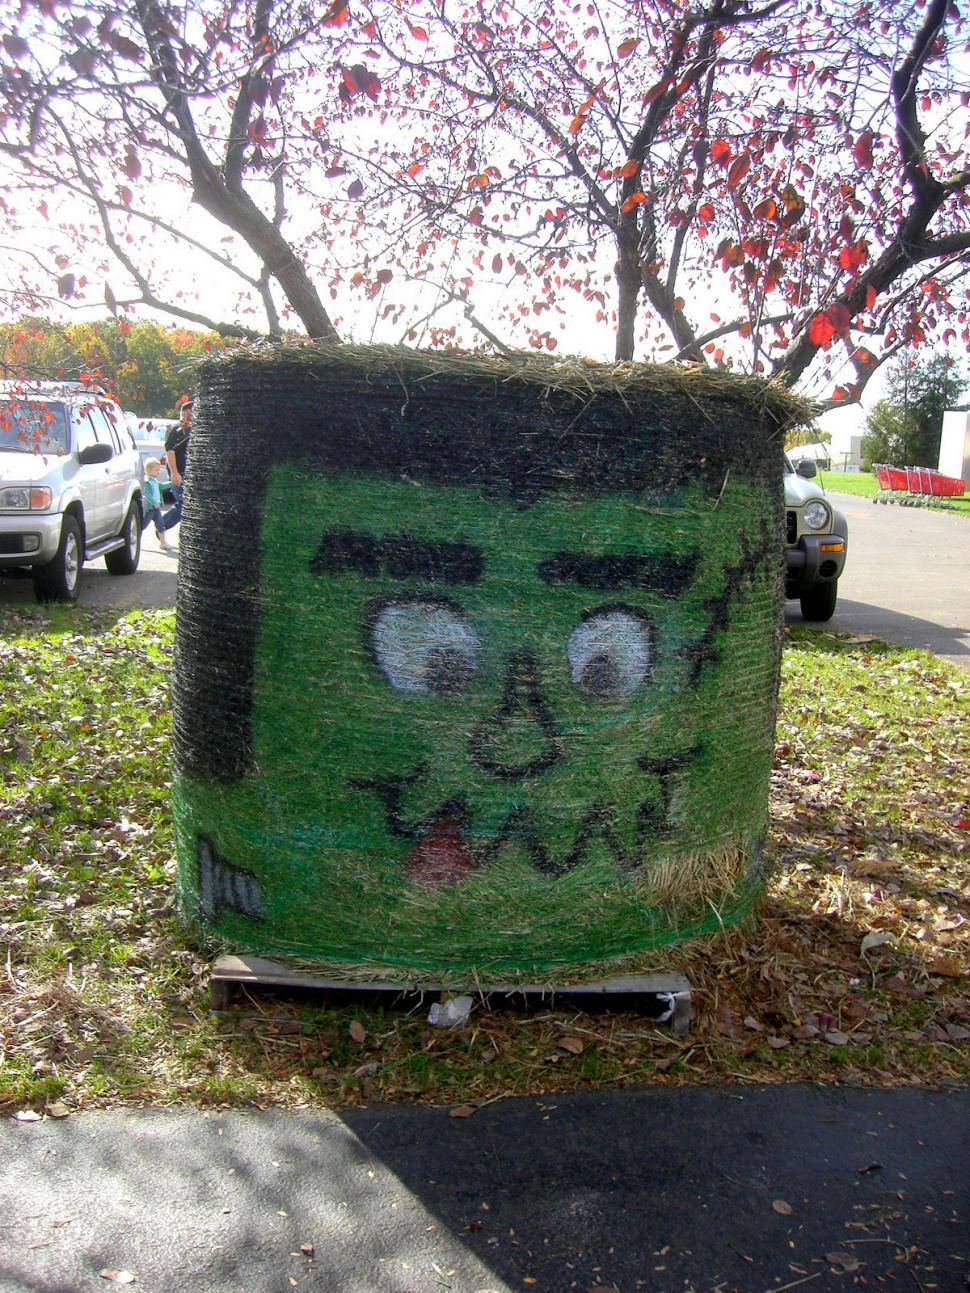 Free Image of Personified Trash Can With Face Painted On It 